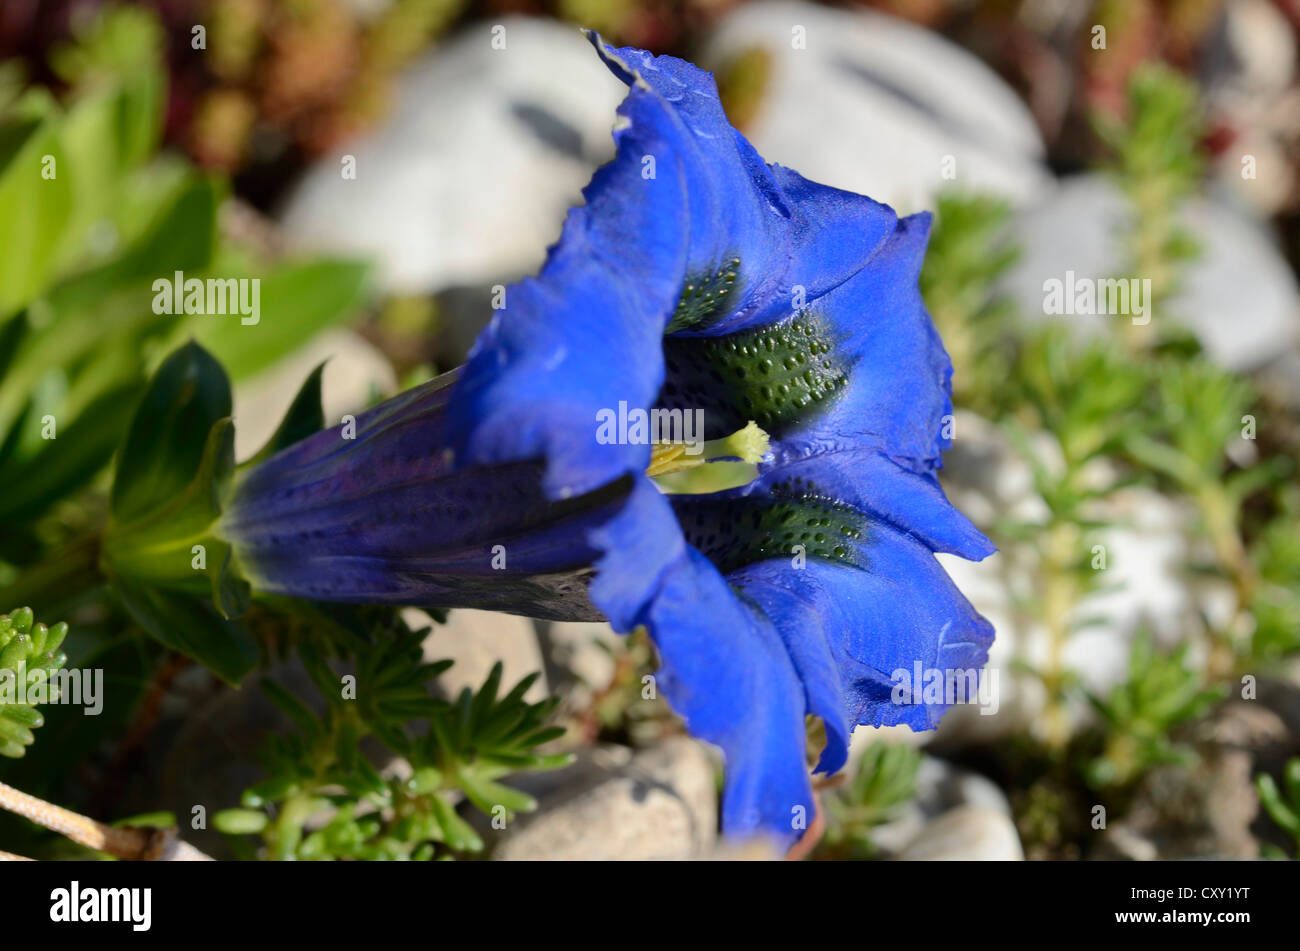 Blue flower of the Clusius Gentian or Gentian (Gentiana clusii) Stock Photo